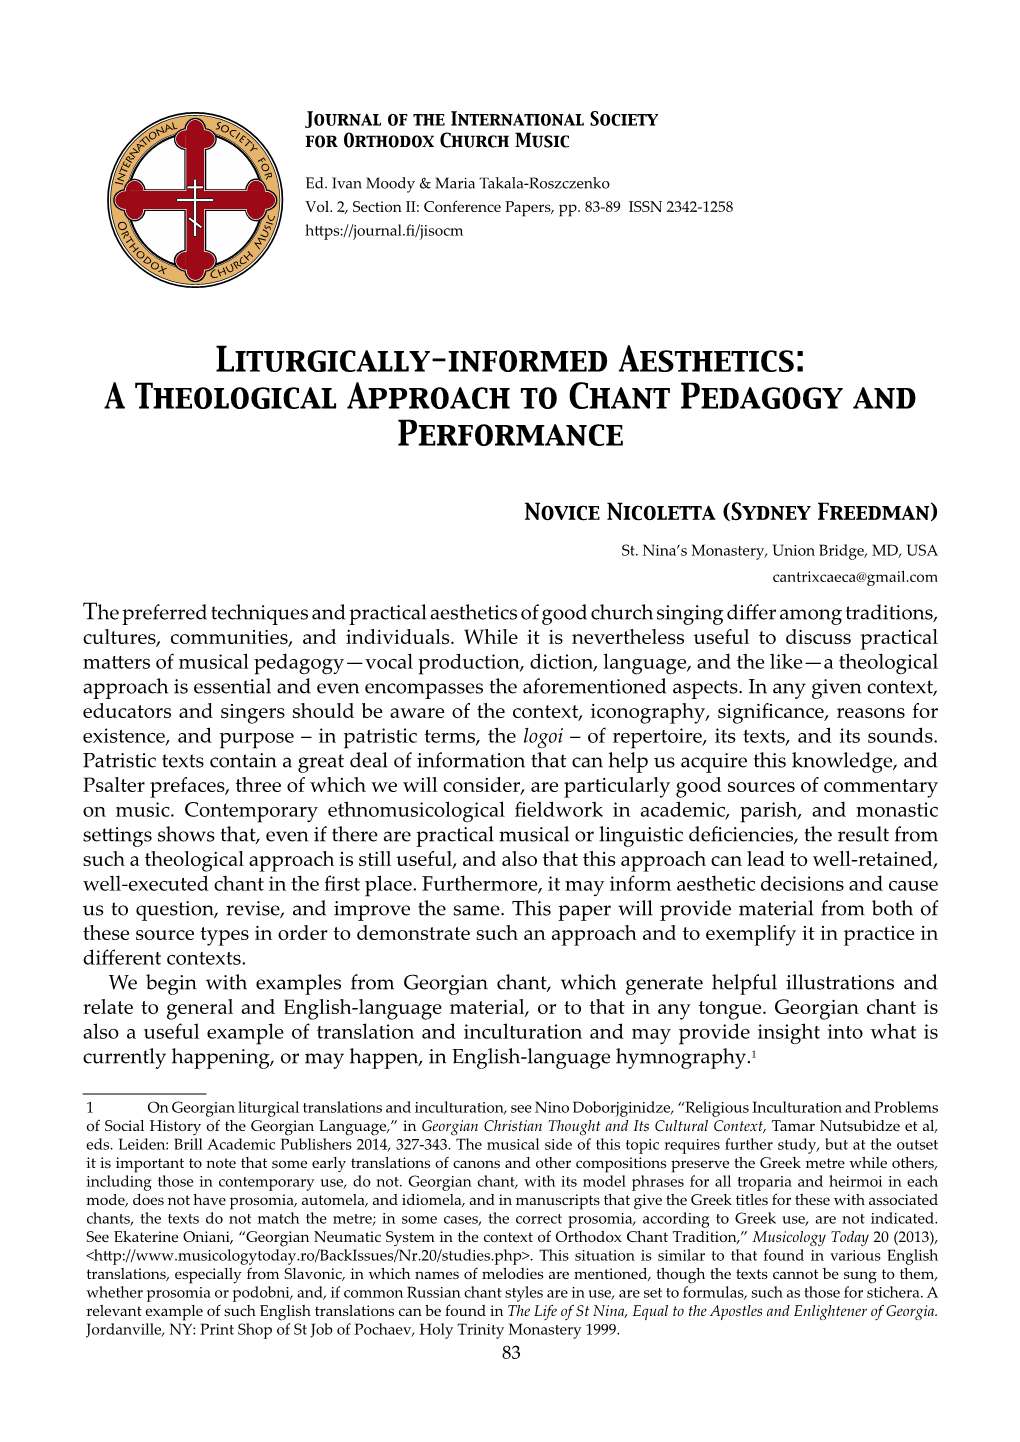 A Theological Approach to Chant Pedagogy and Performance